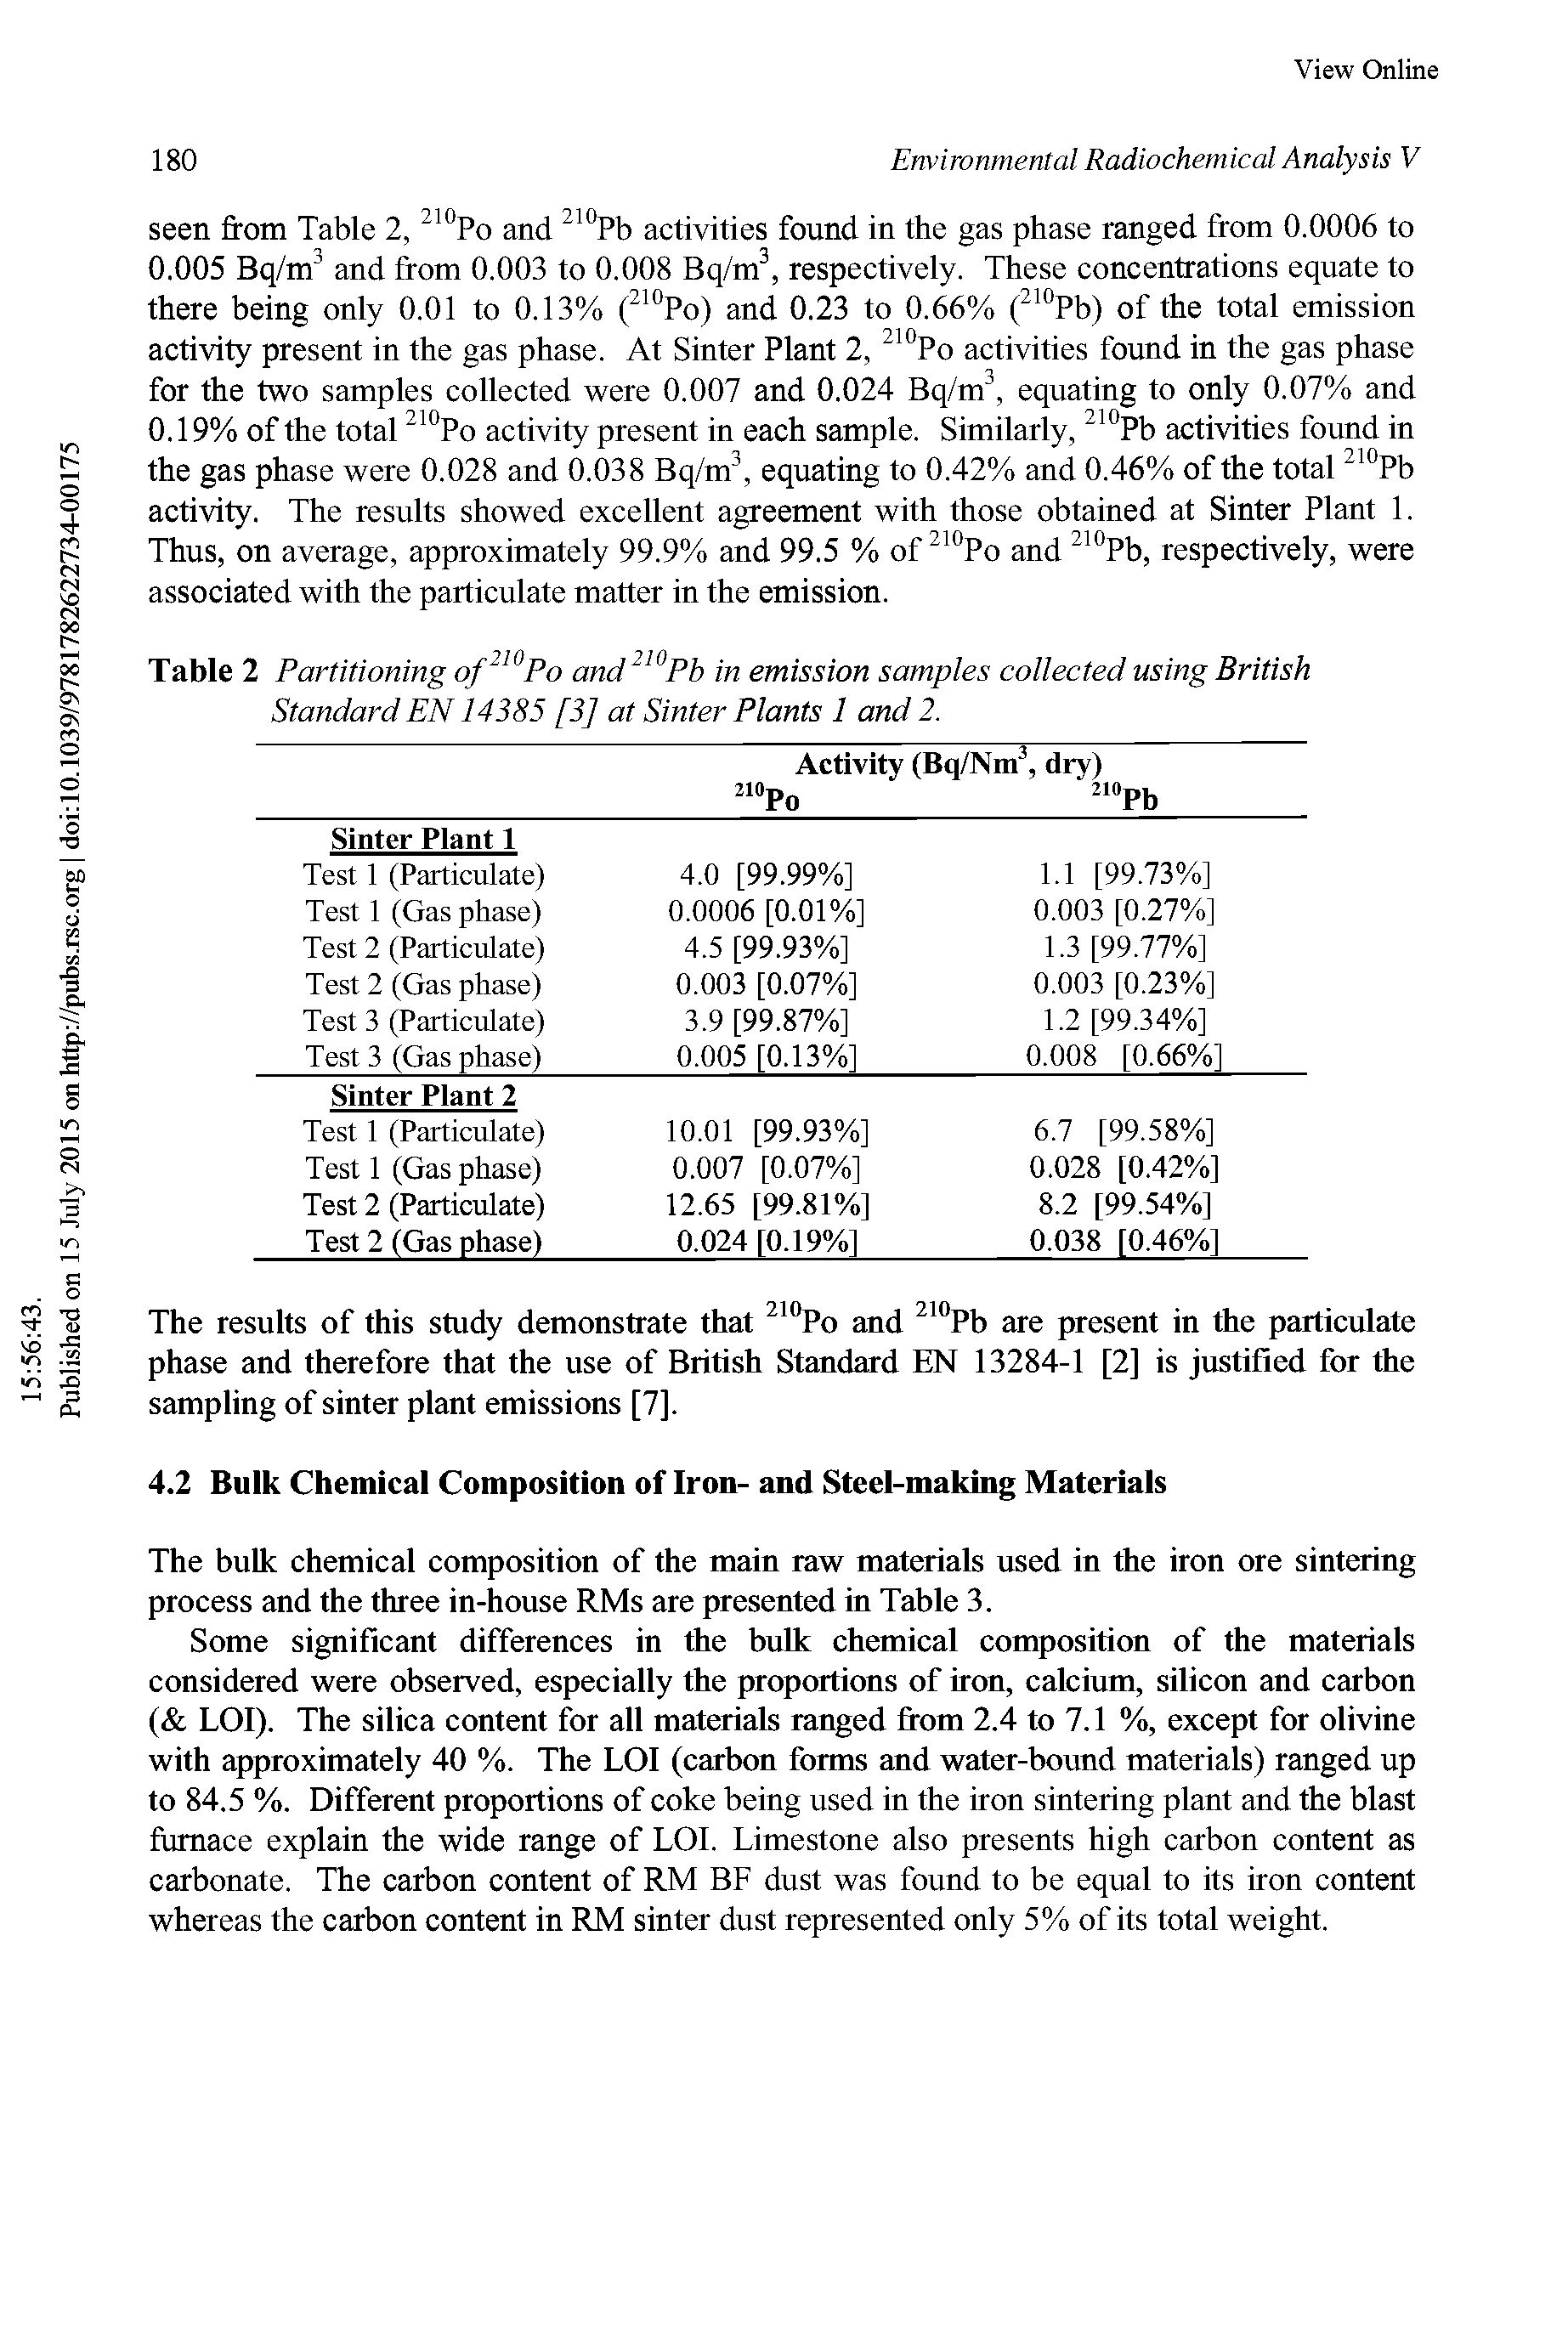 Table 2 Partitioning of Po and Pb in emission samples collected using British Standard EN14385 [3] at Sinter Plants 1 and 2.